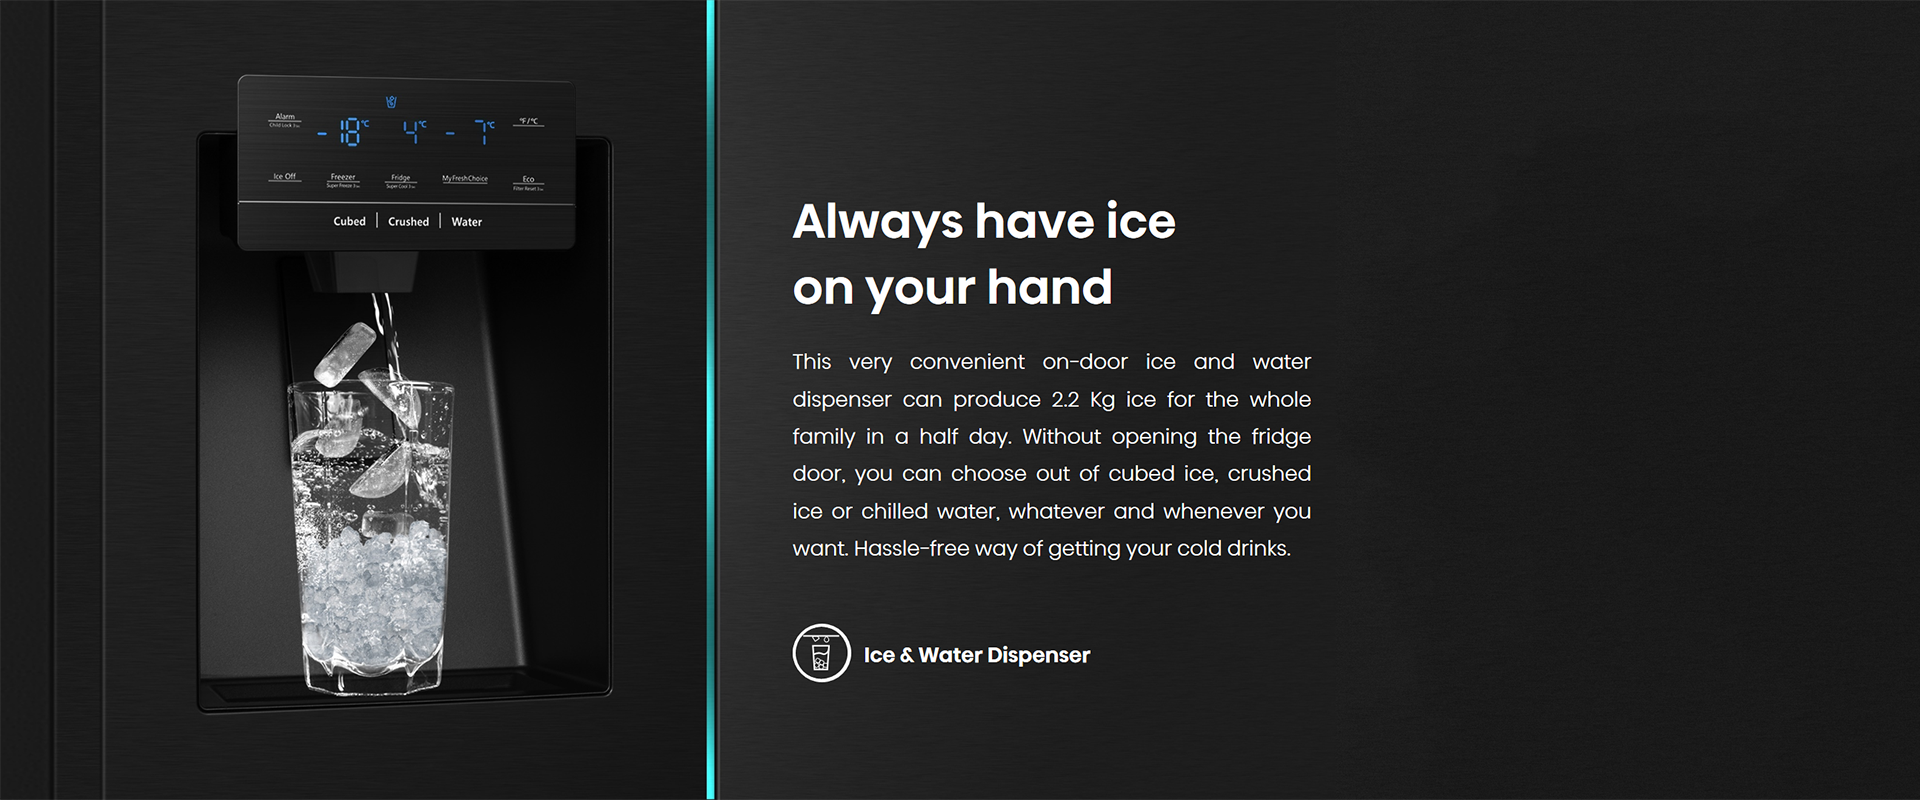 26-ice-and-water-dispenser